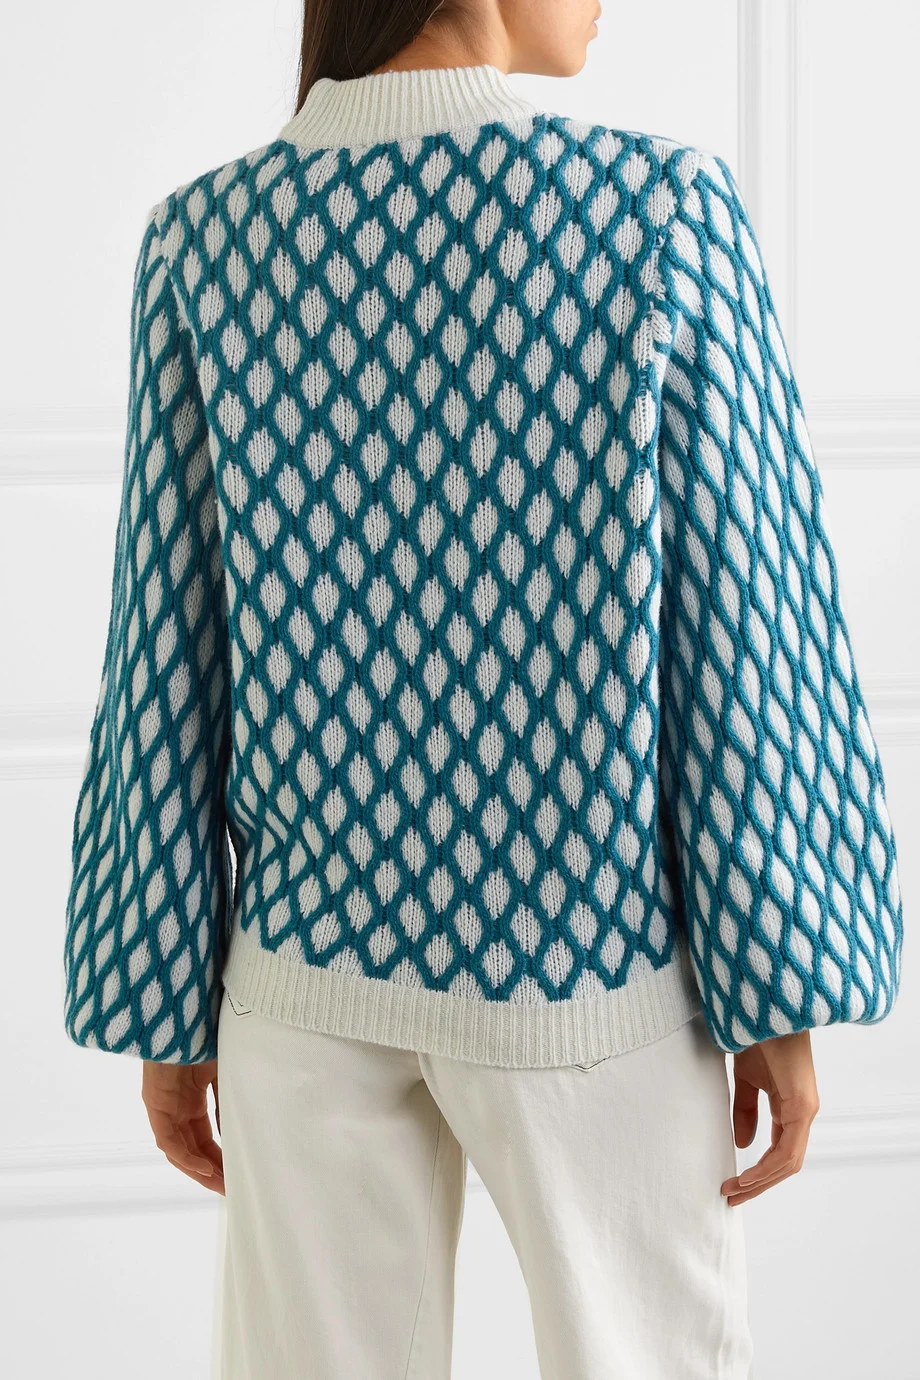 Ed beskytte Sky Stine Goya + Carlo Two-Tone Cable-Knit Sweater